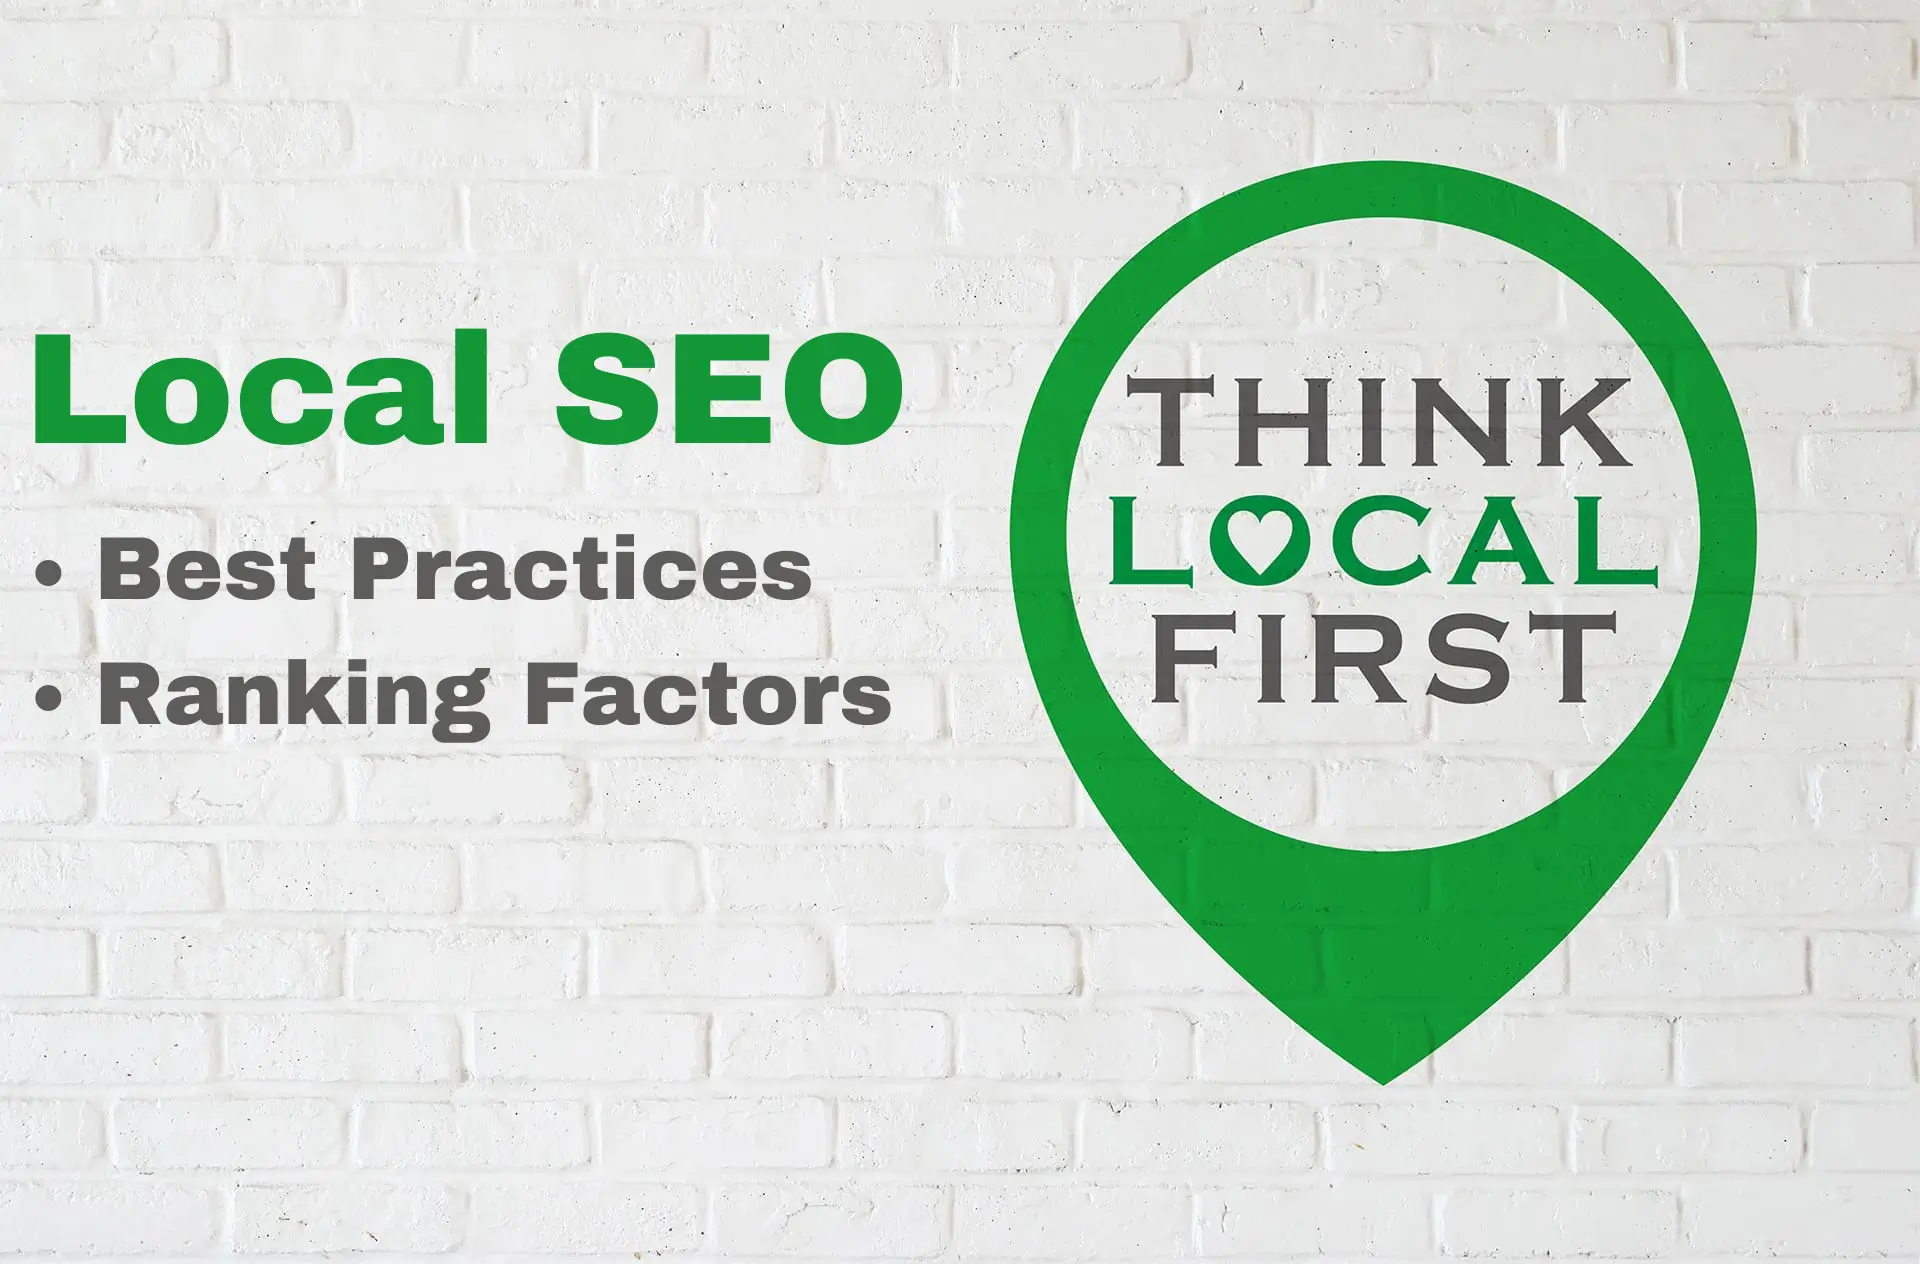 Local SEO Best Practices and Ranking Factors